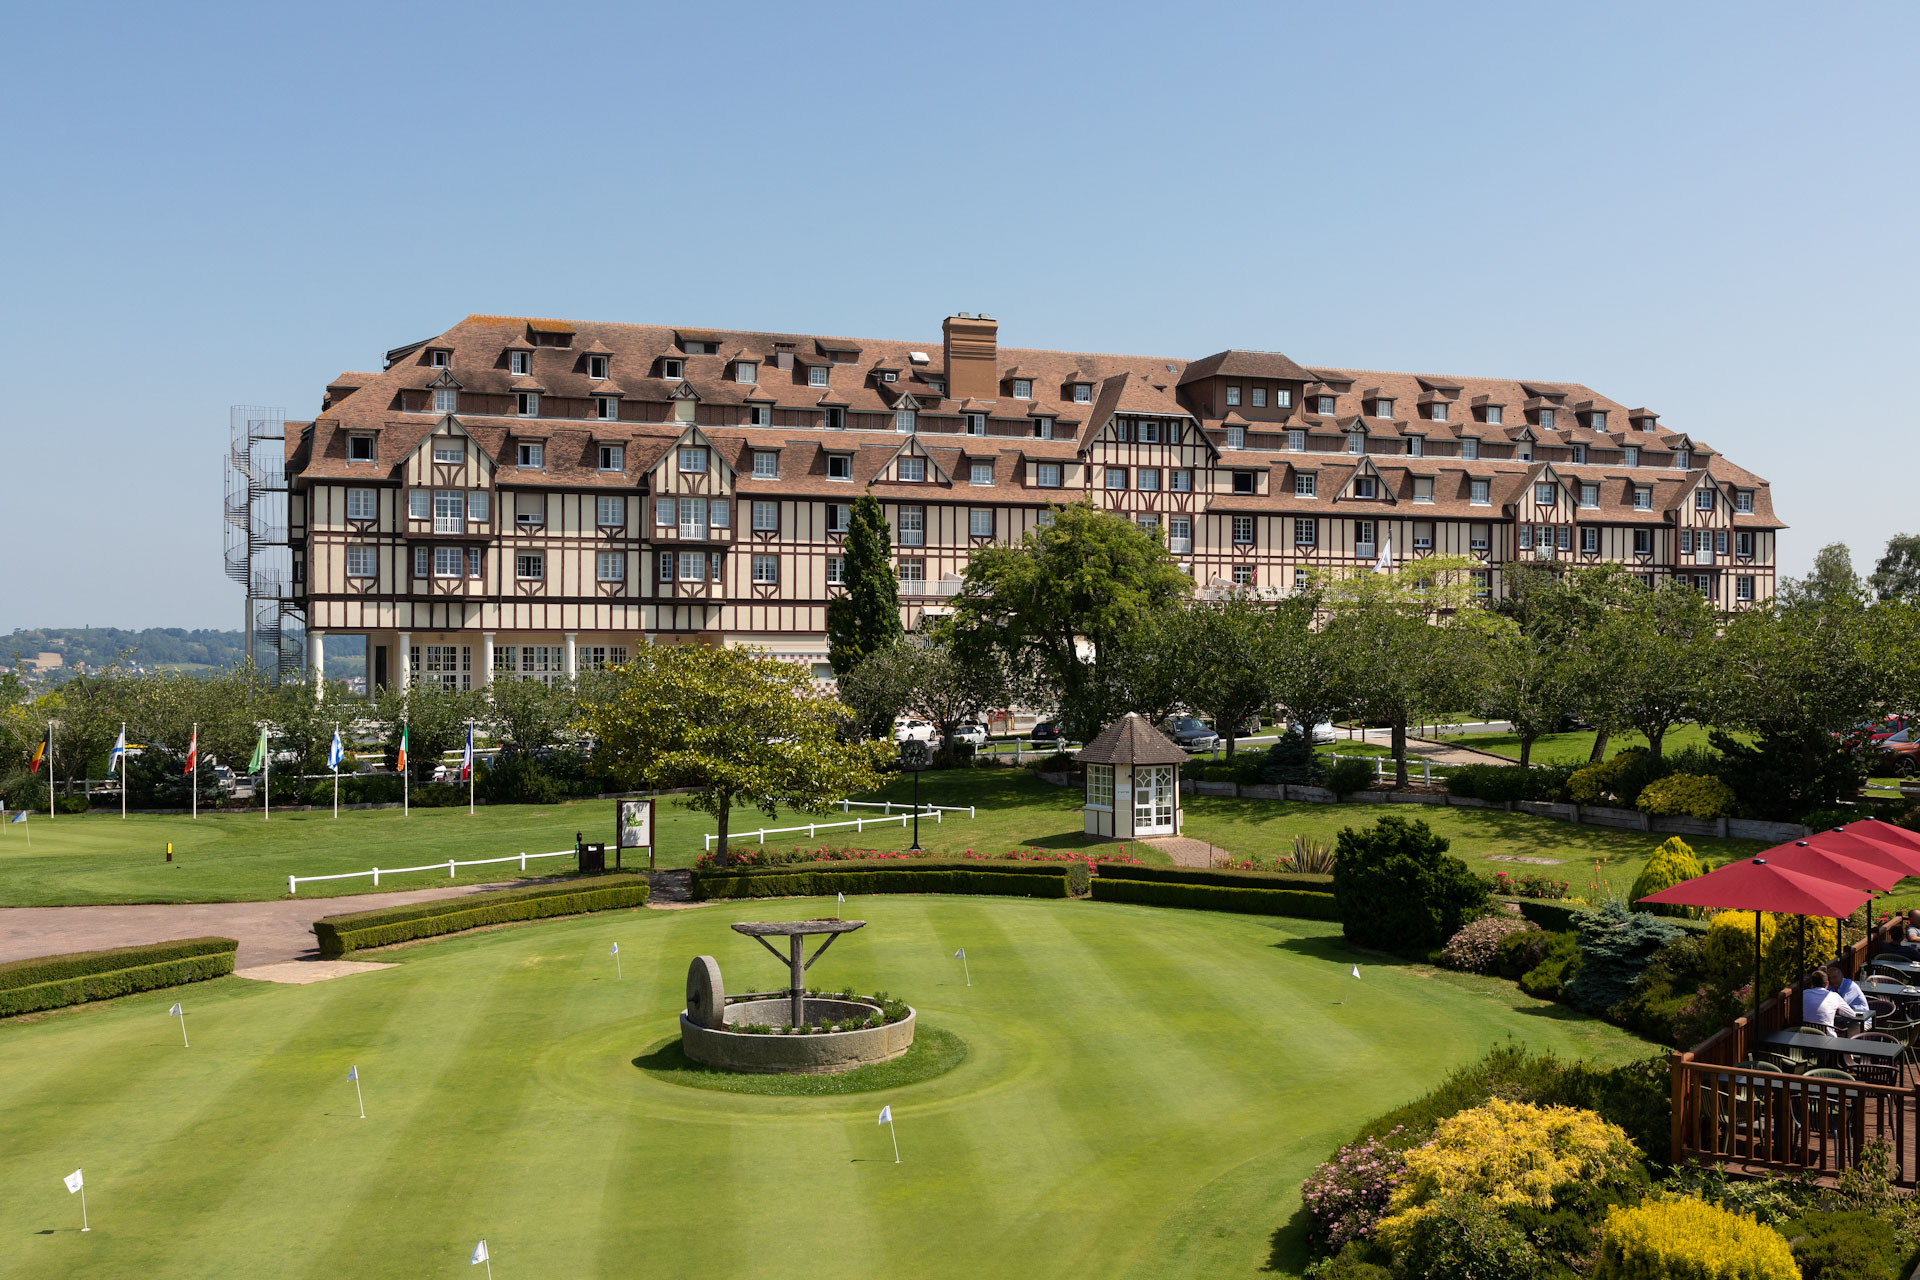 The exterior of Hotel du Golf Barriere, Deauville, France from the golf course